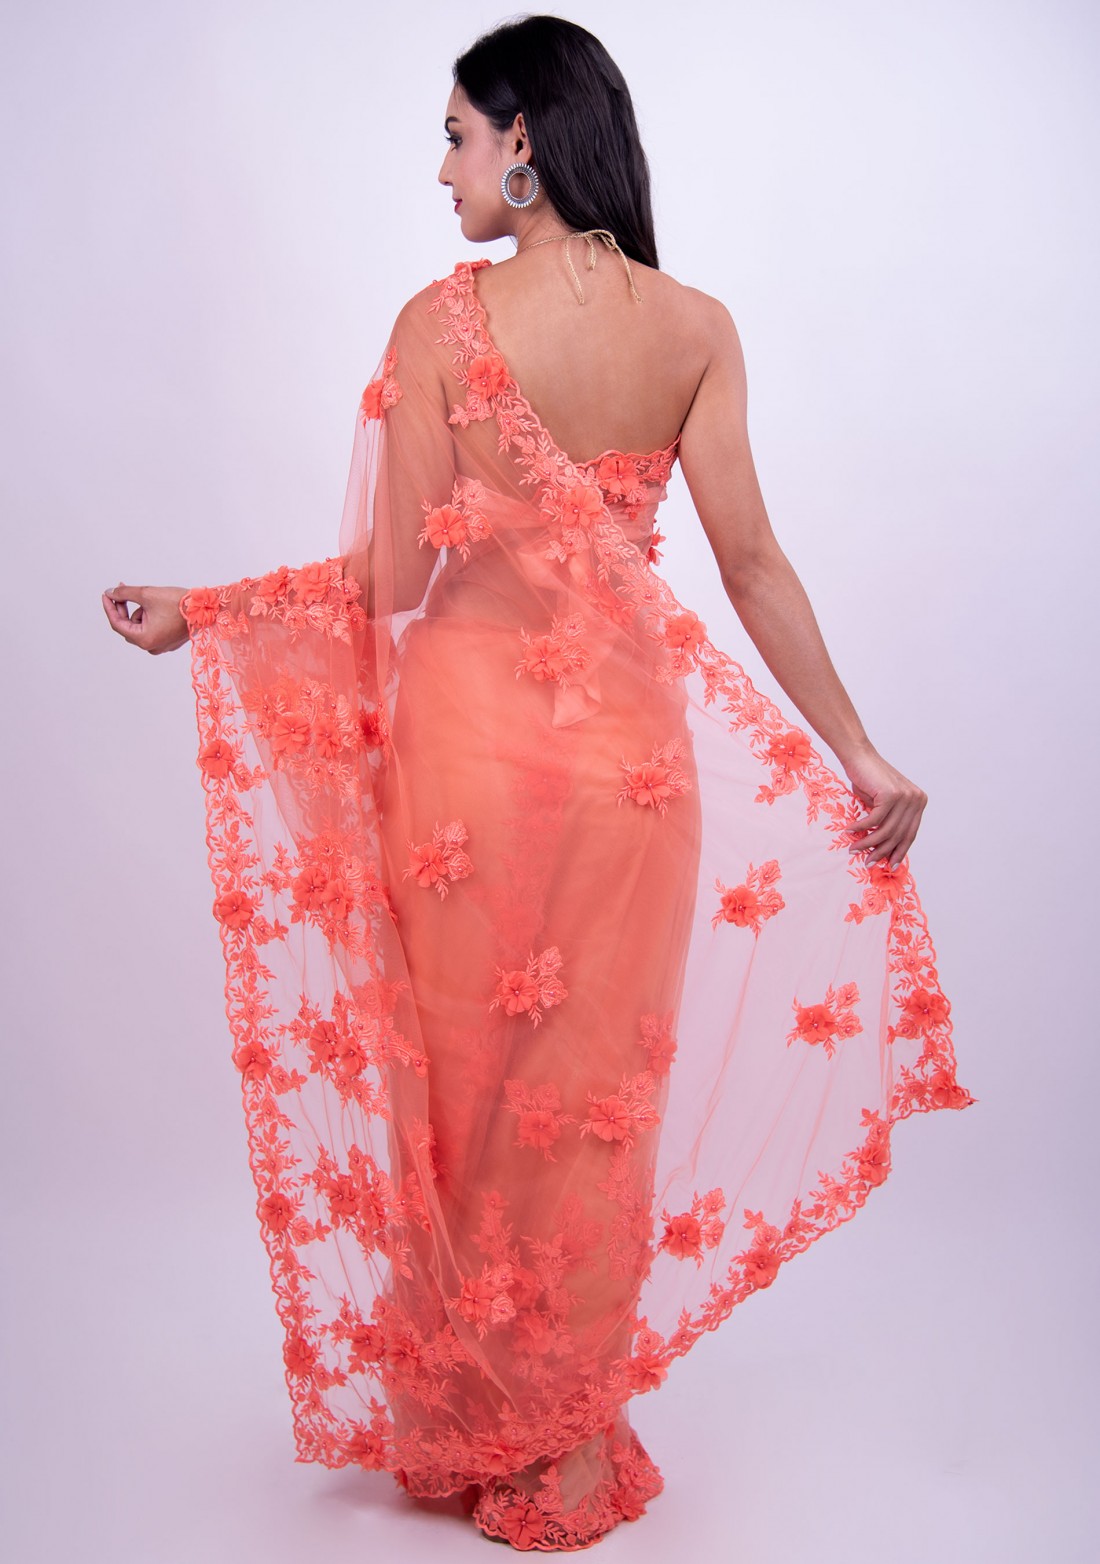 Applique Work Coral Embroidered Net Saree